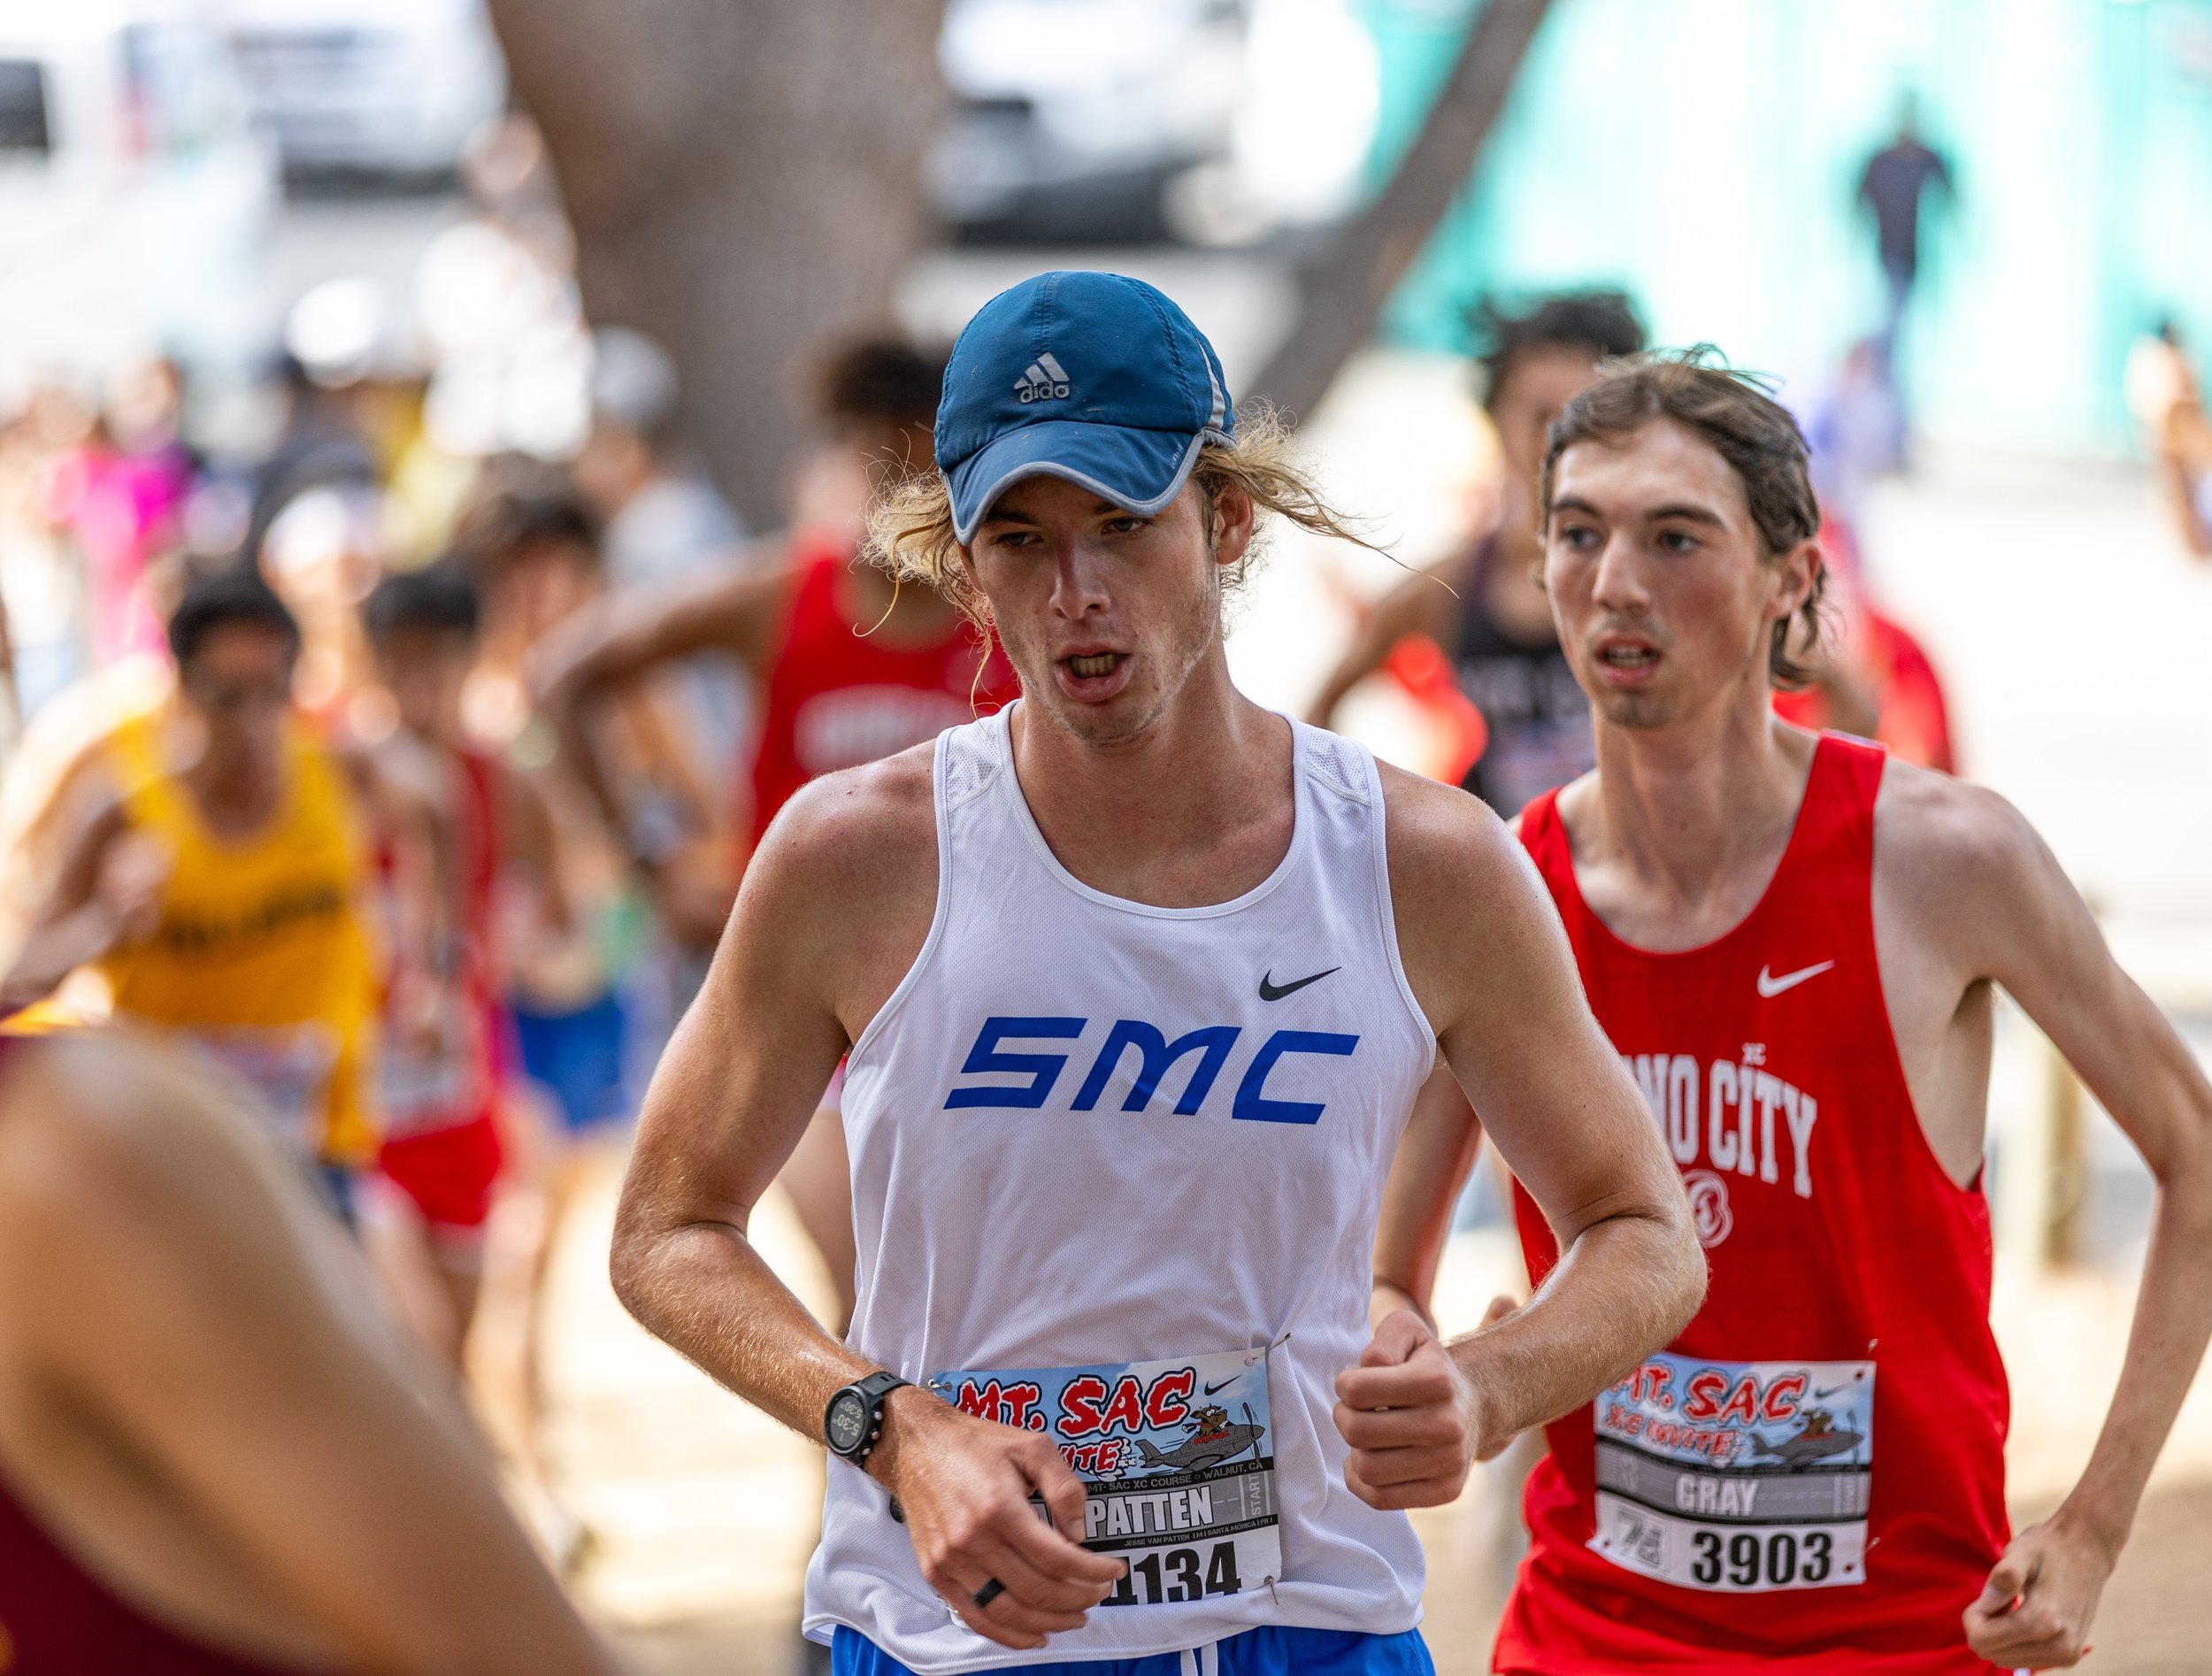  Jesse Van Patten completeing the first mile at the MT. SAC Cross Country Invitational on Friday, Oct 13 at MT. SAC in Walnut, Calif. (Danilo Perez | The Corsair) 